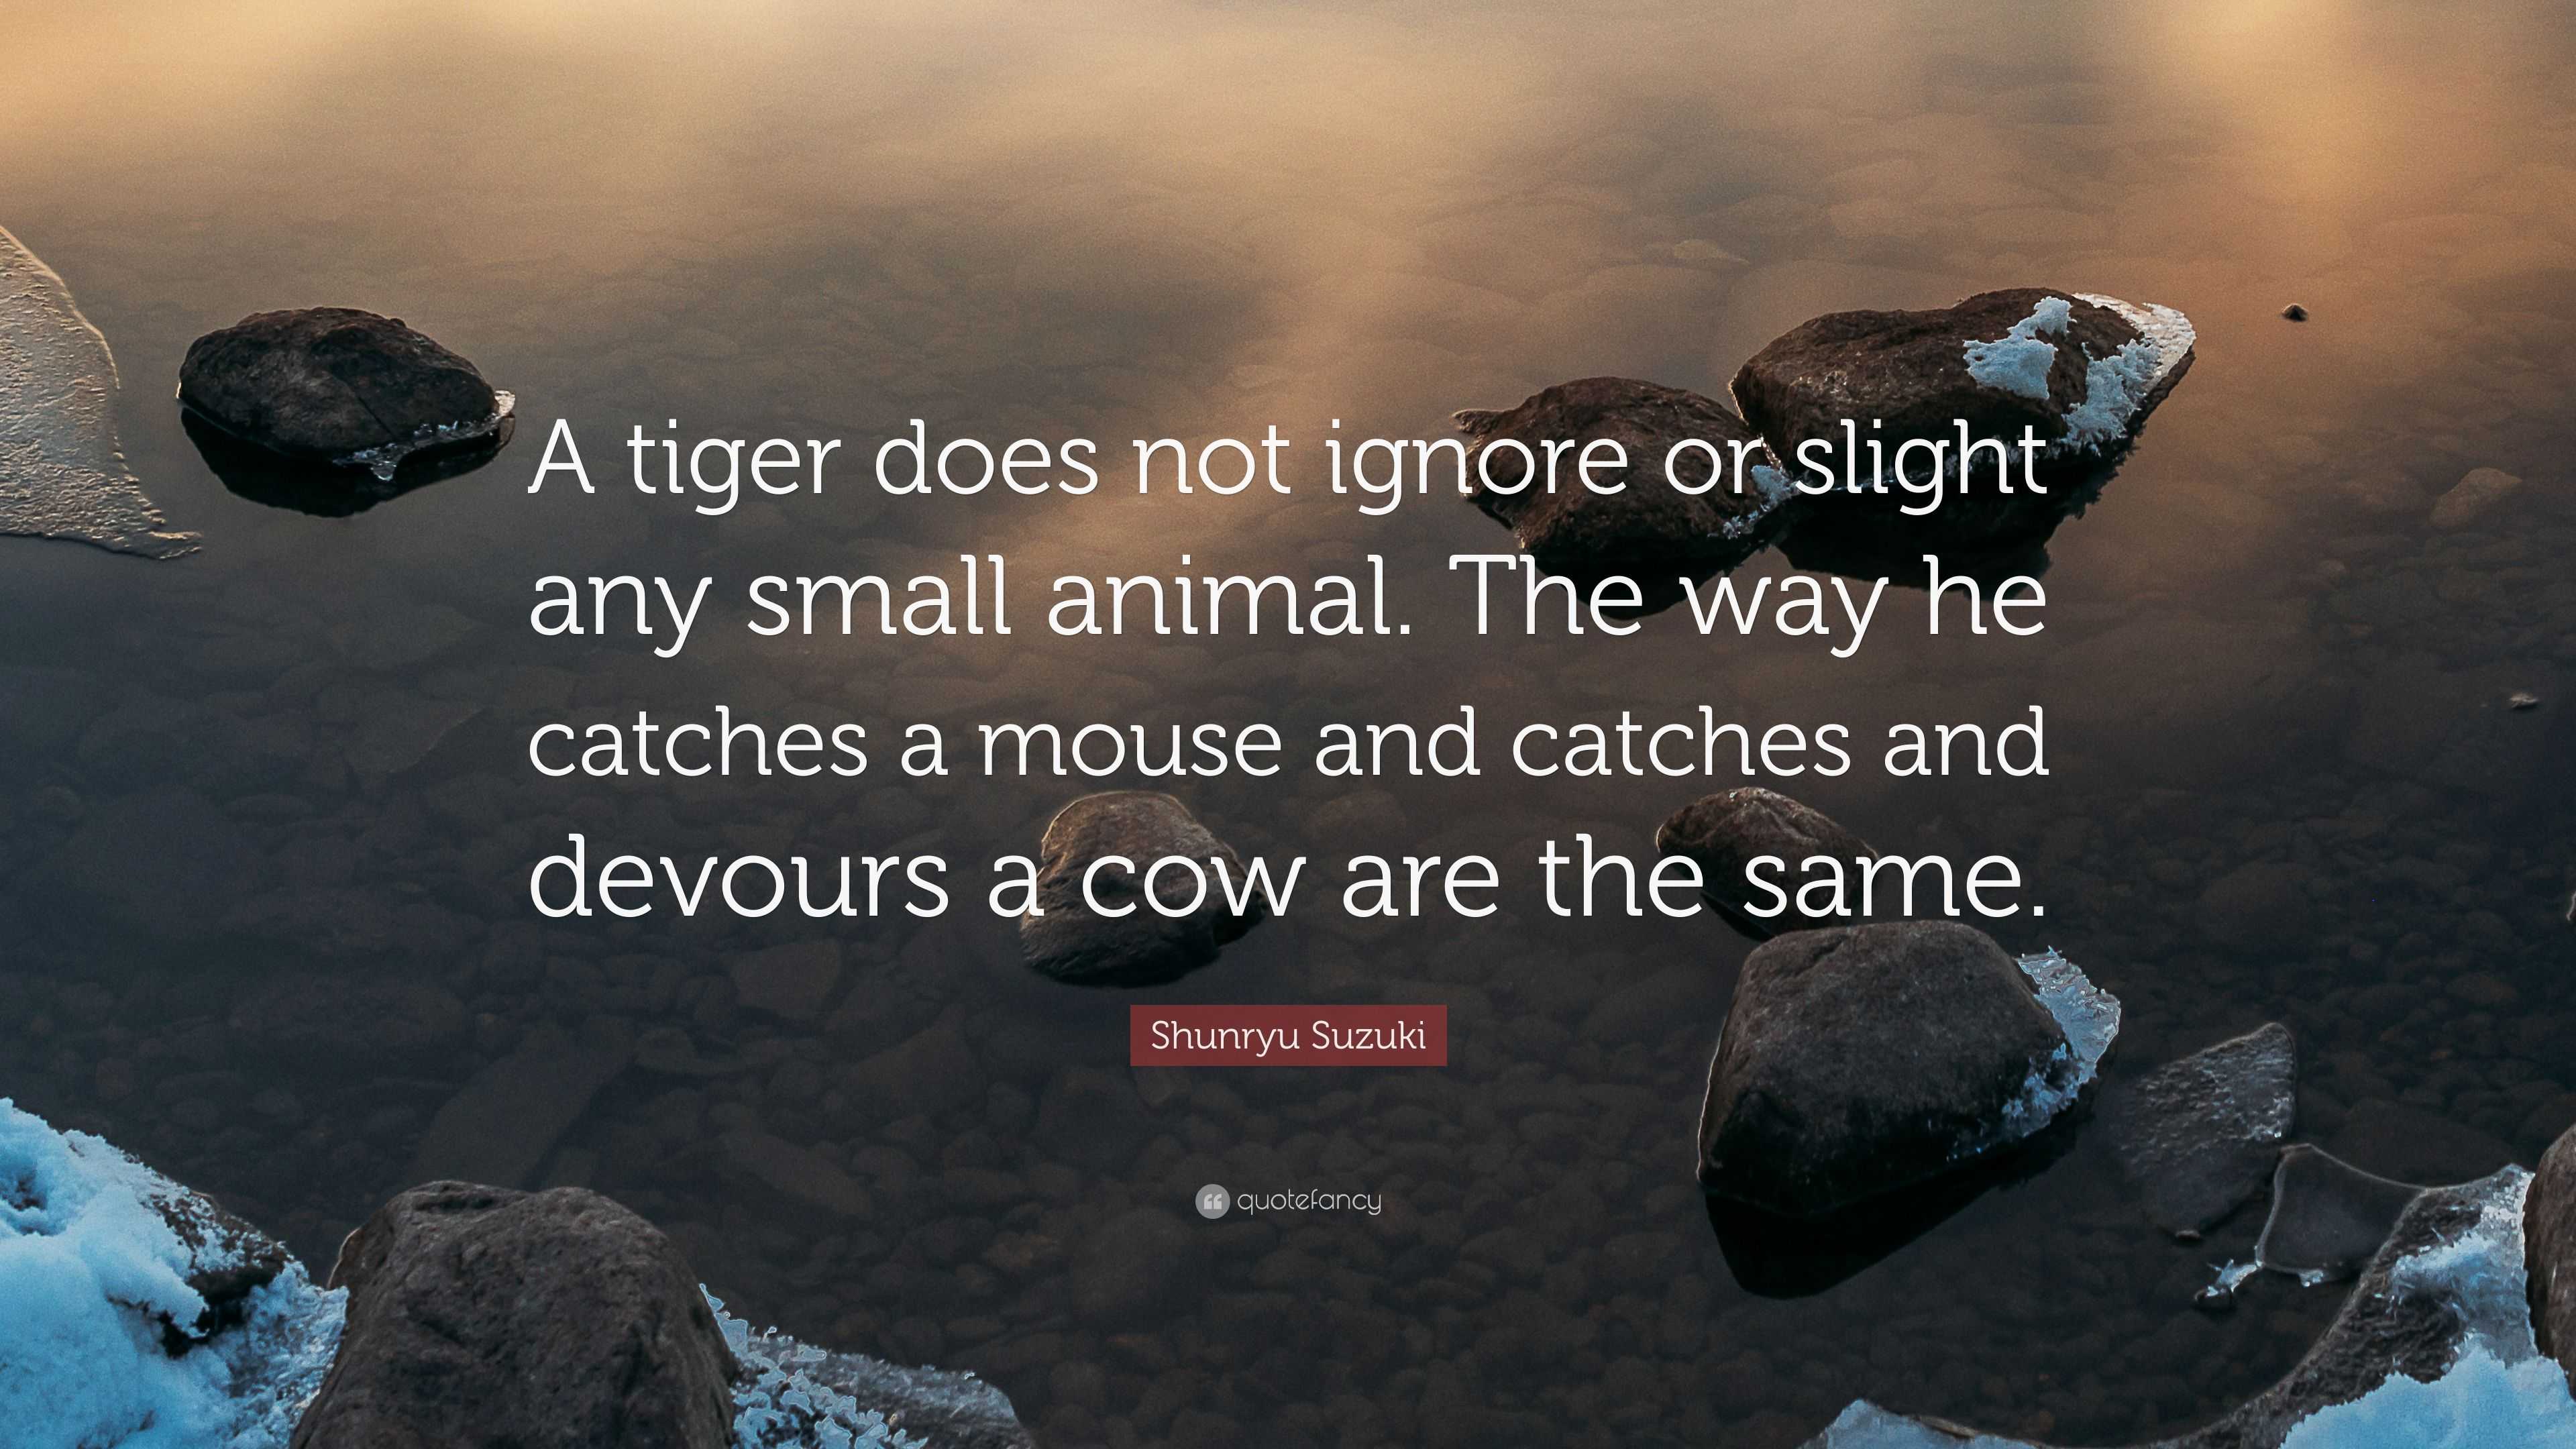 Shunryu Suzuki Quote: “A tiger does not ignore or slight any small animal.  The way he catches a mouse and catches and devours a cow are the sam...”